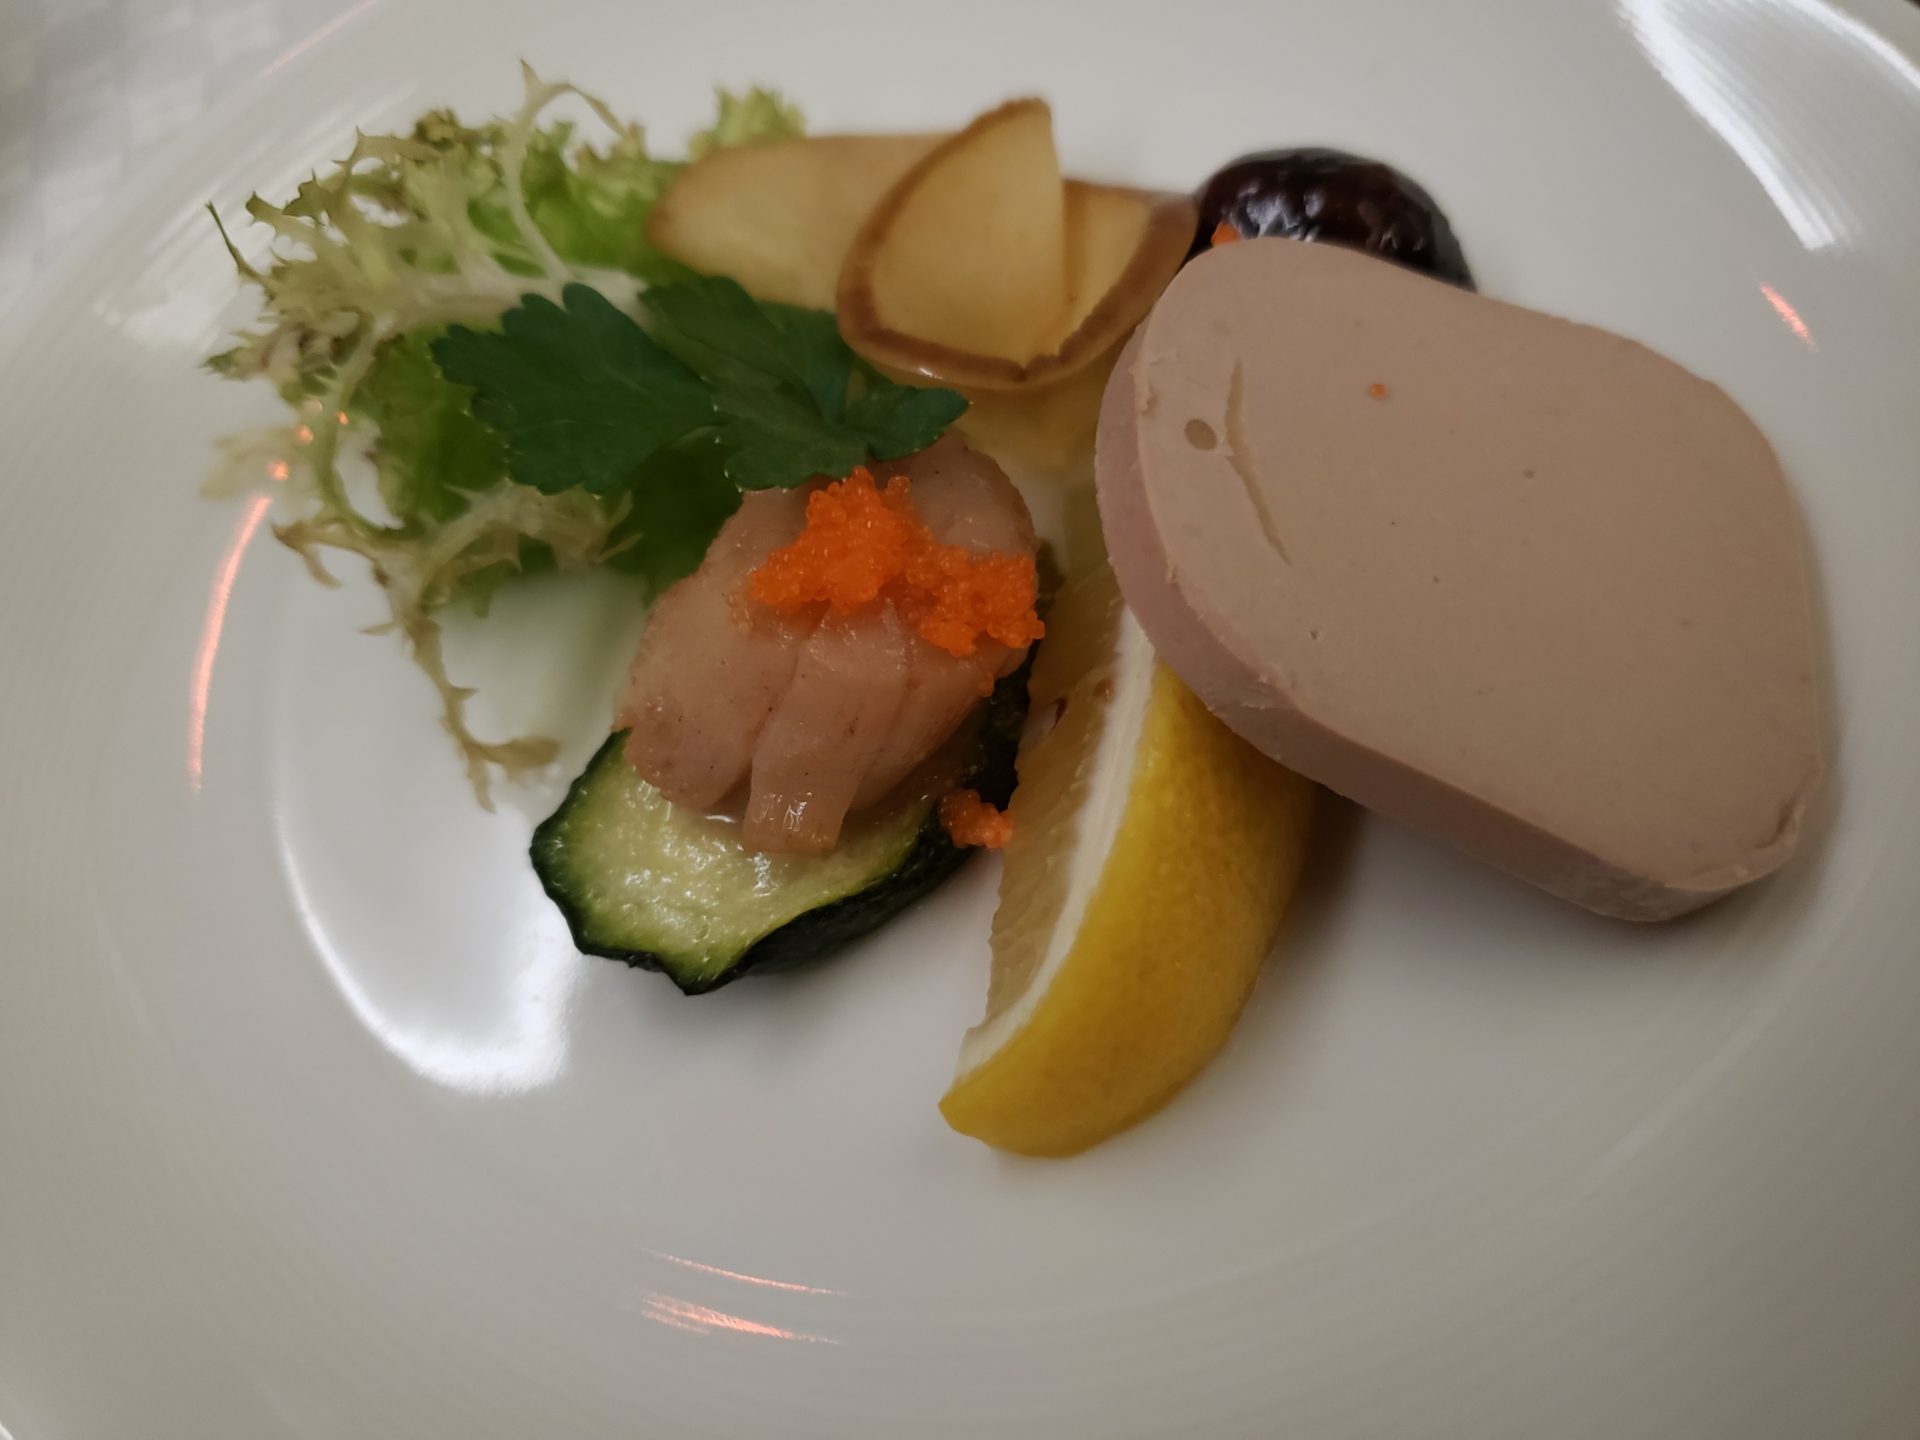 a plate of food on a white plate